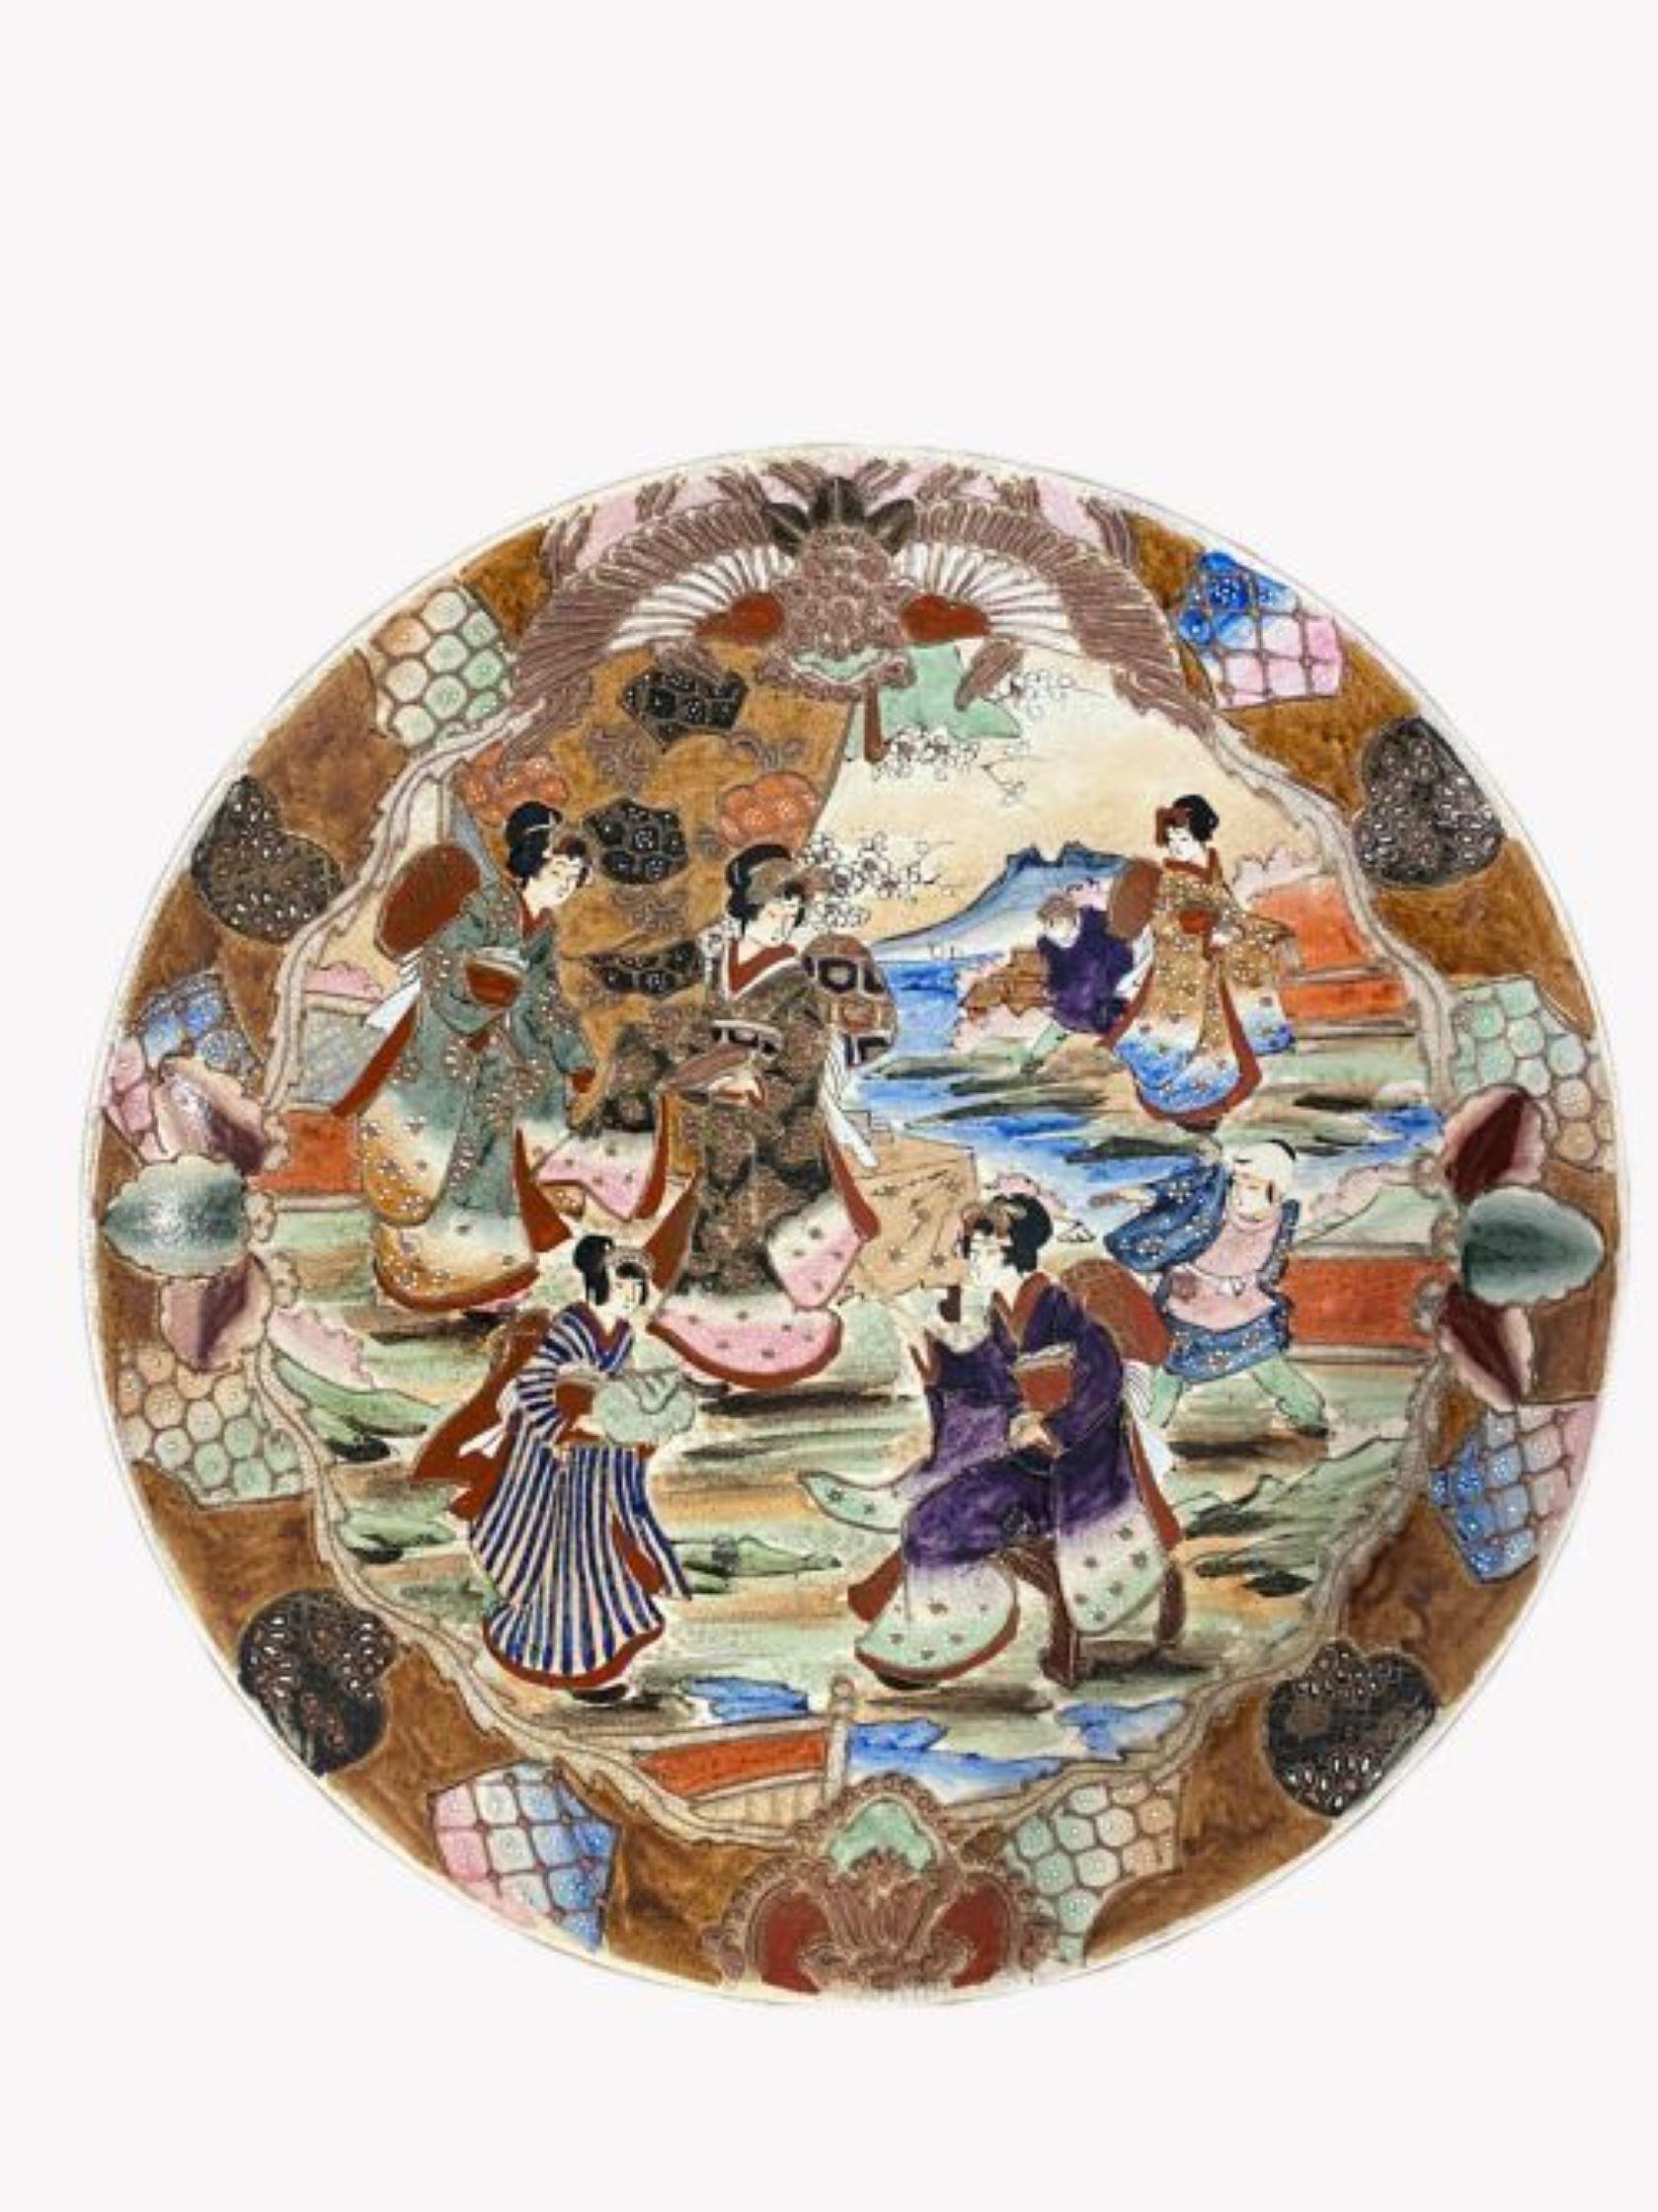 Large antique Japanese quality Satsuma hand painted plate,
Fantastic quality hand painted Japanese charger with wonderful Japanese figures in hand painted colourful decoration in vivid red, gold, blue, green, white and orange.